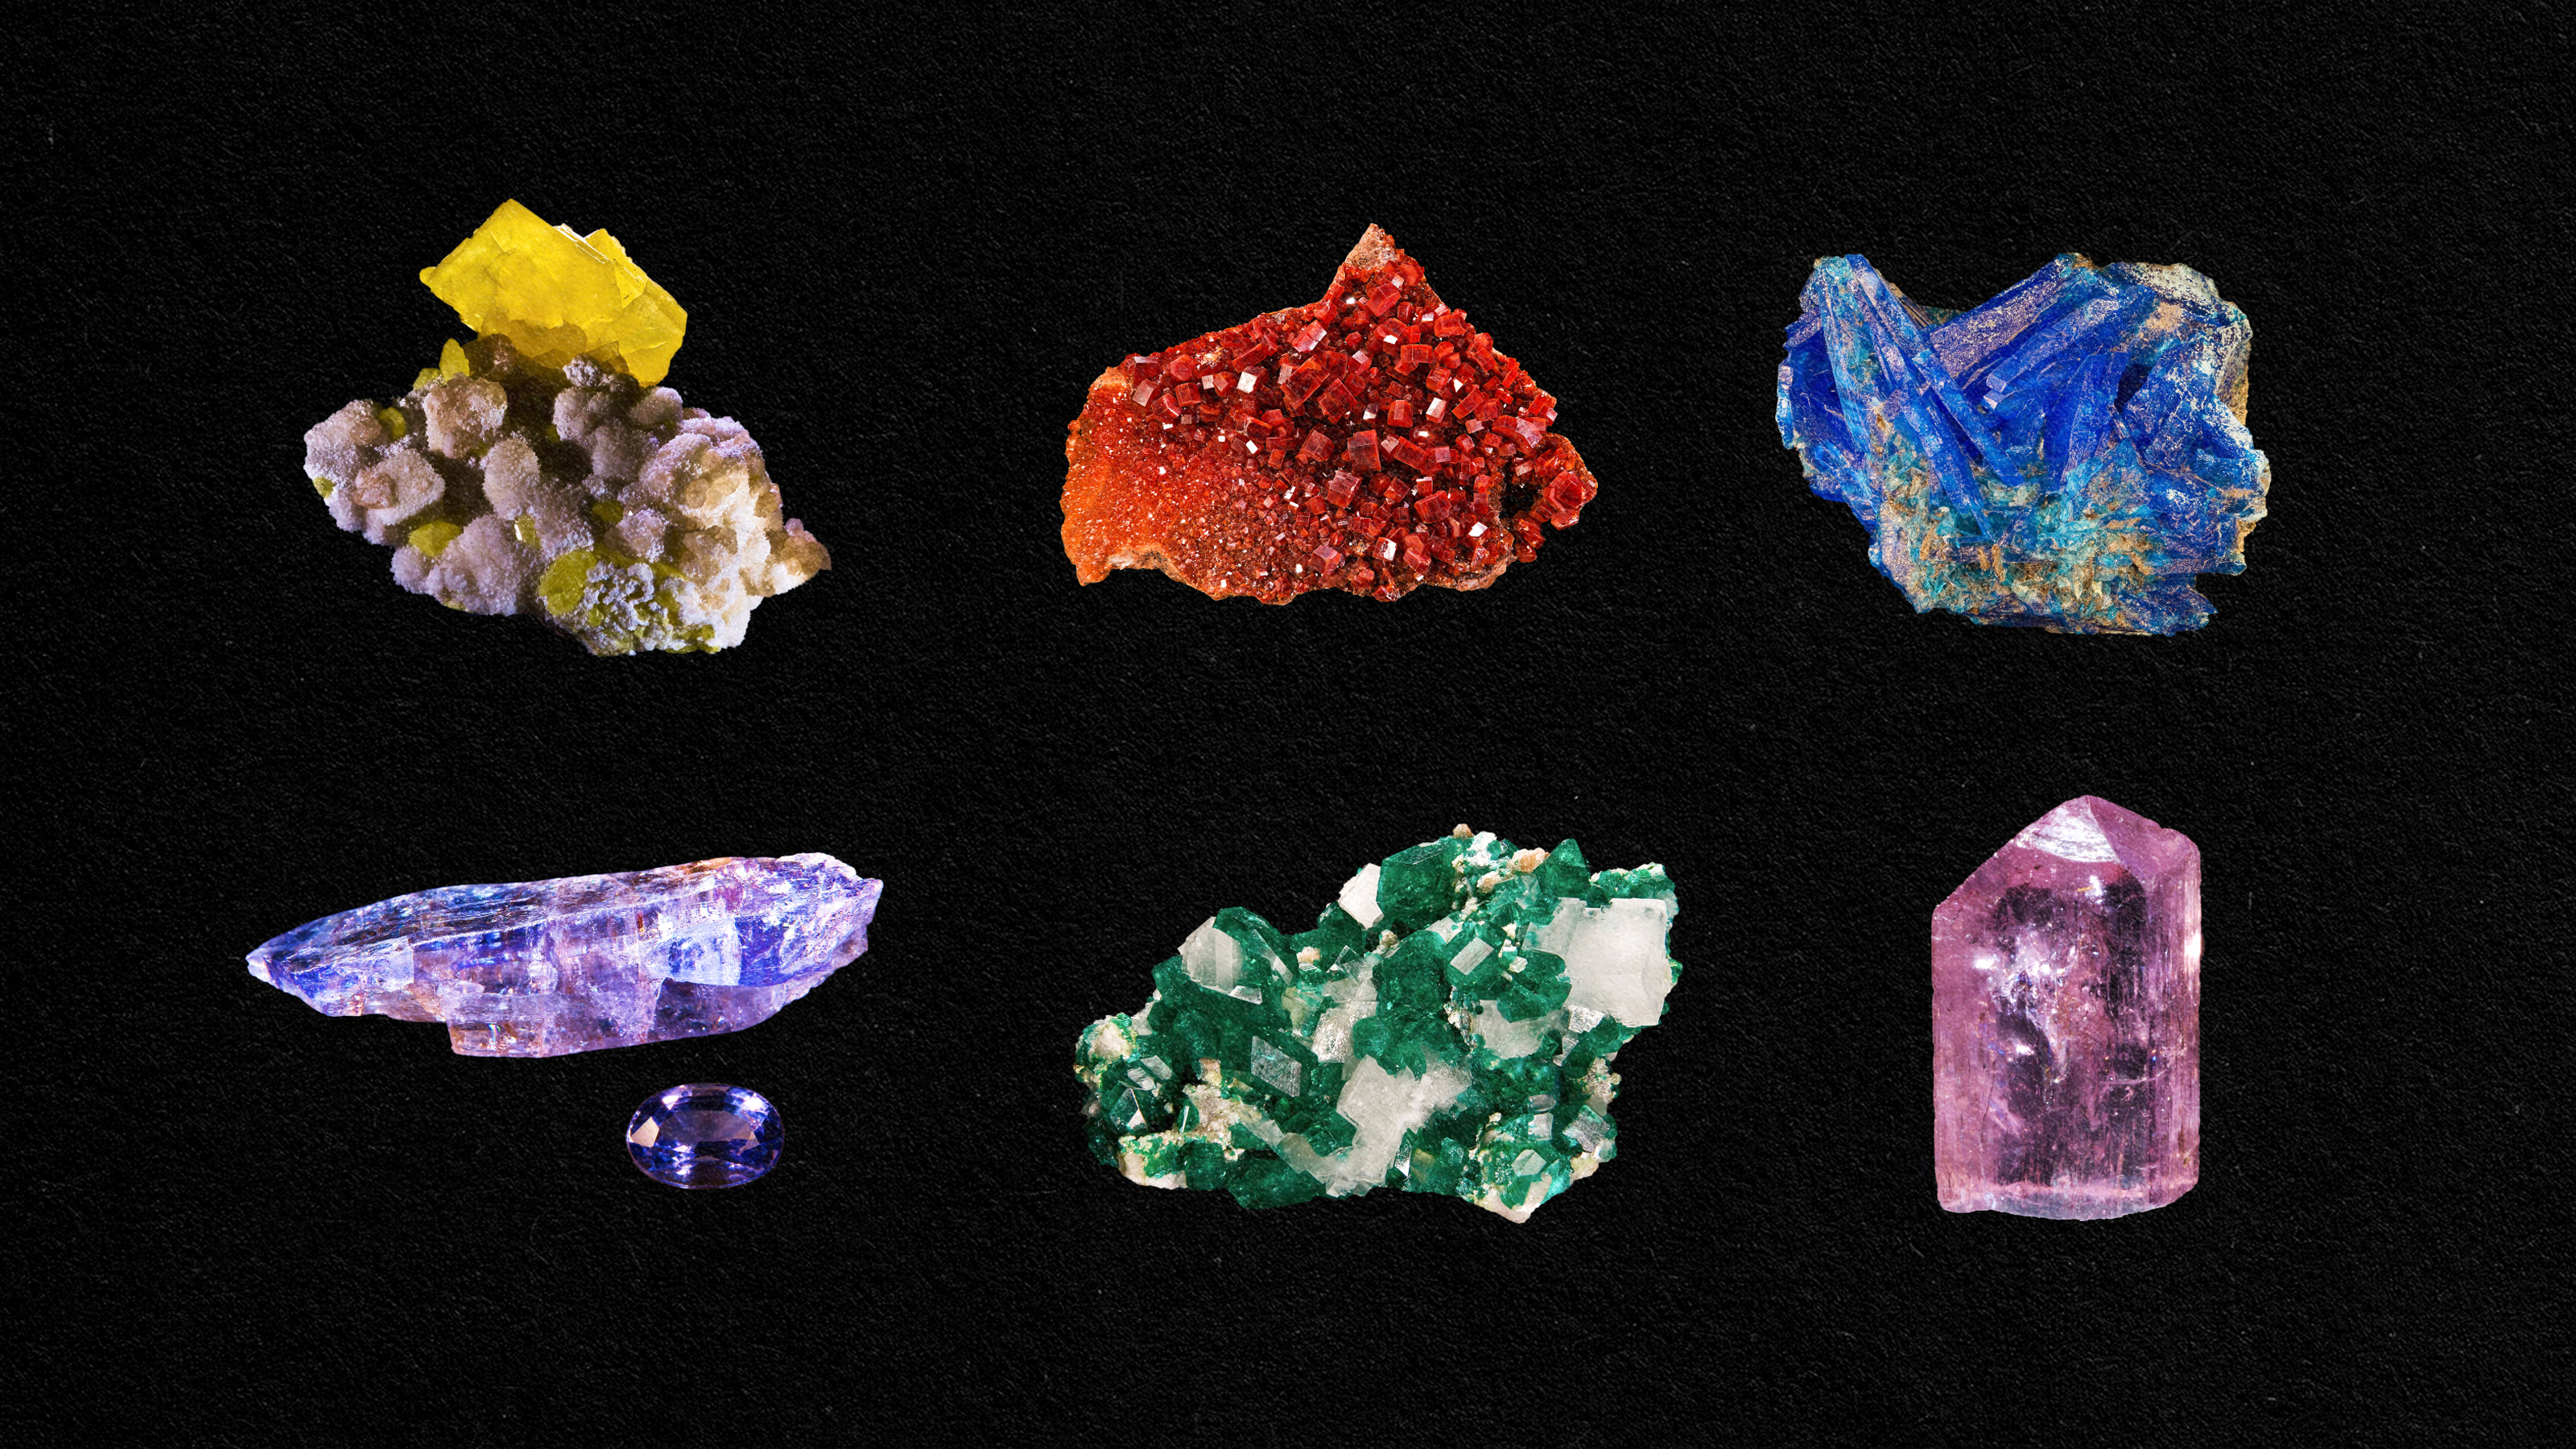 A collection of different colored minerals on a black background.